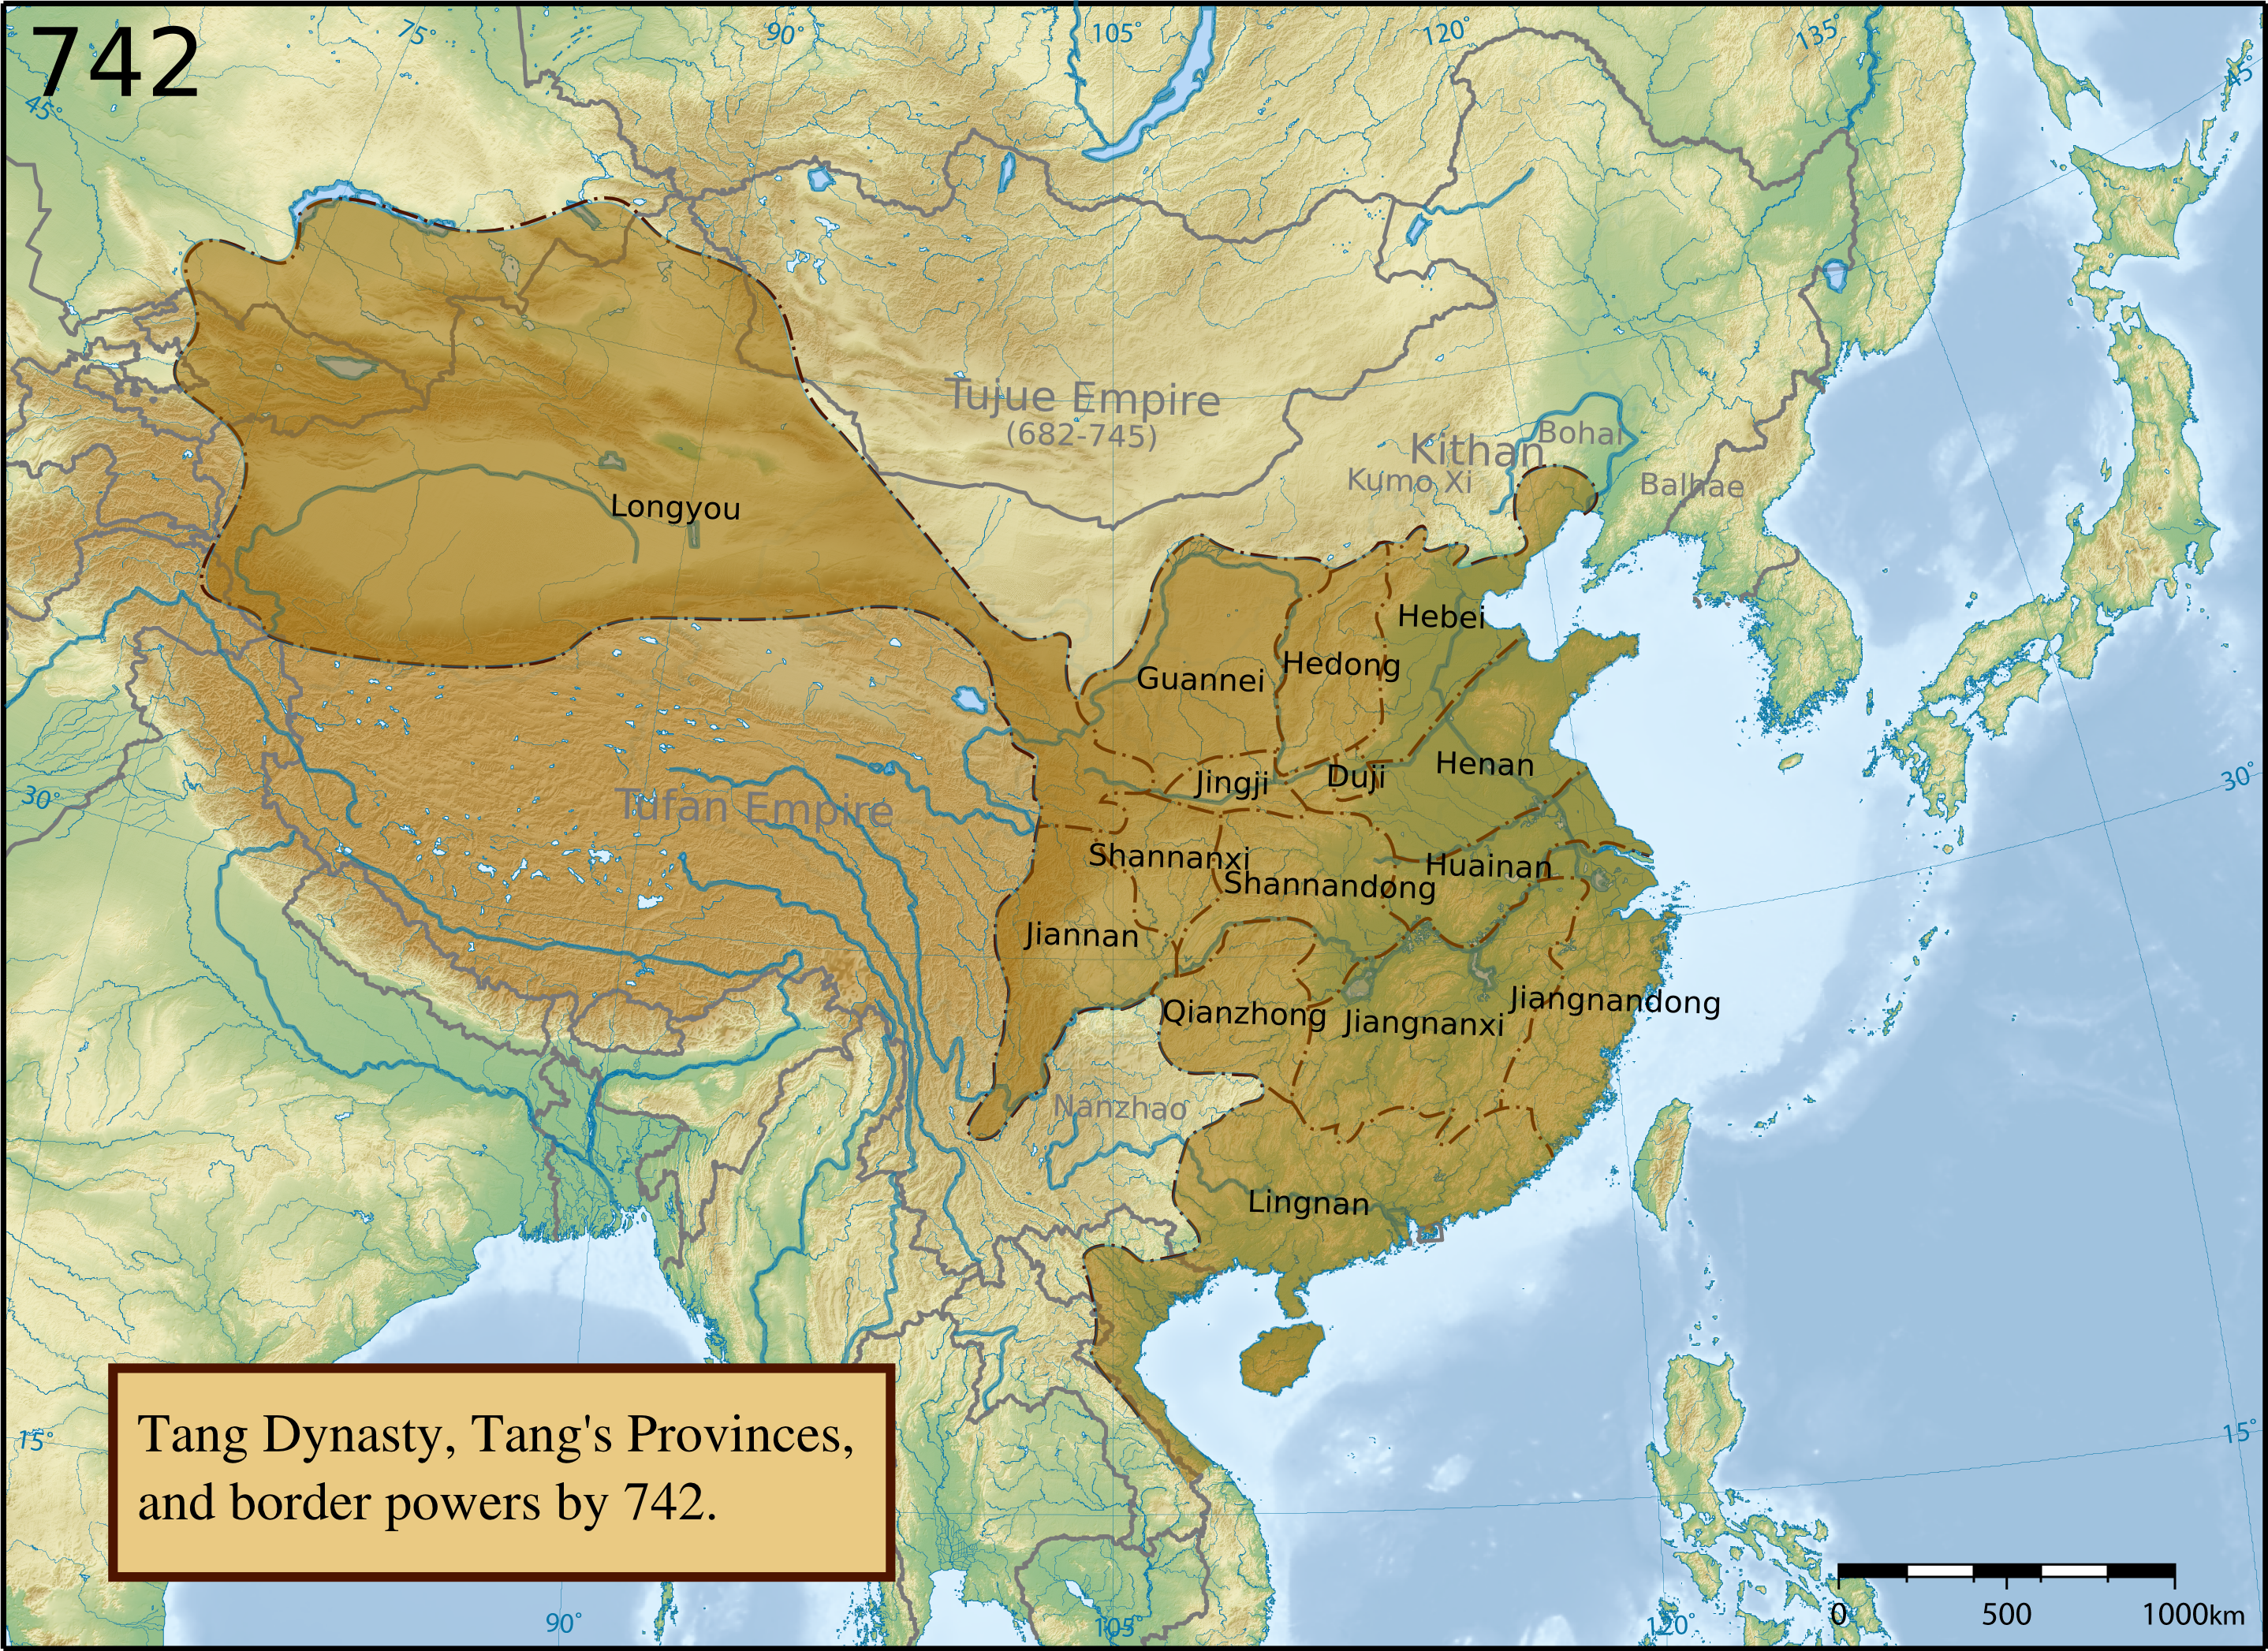 Map of the Tang Dynasty labeled with thirteen of Tang's provinces.